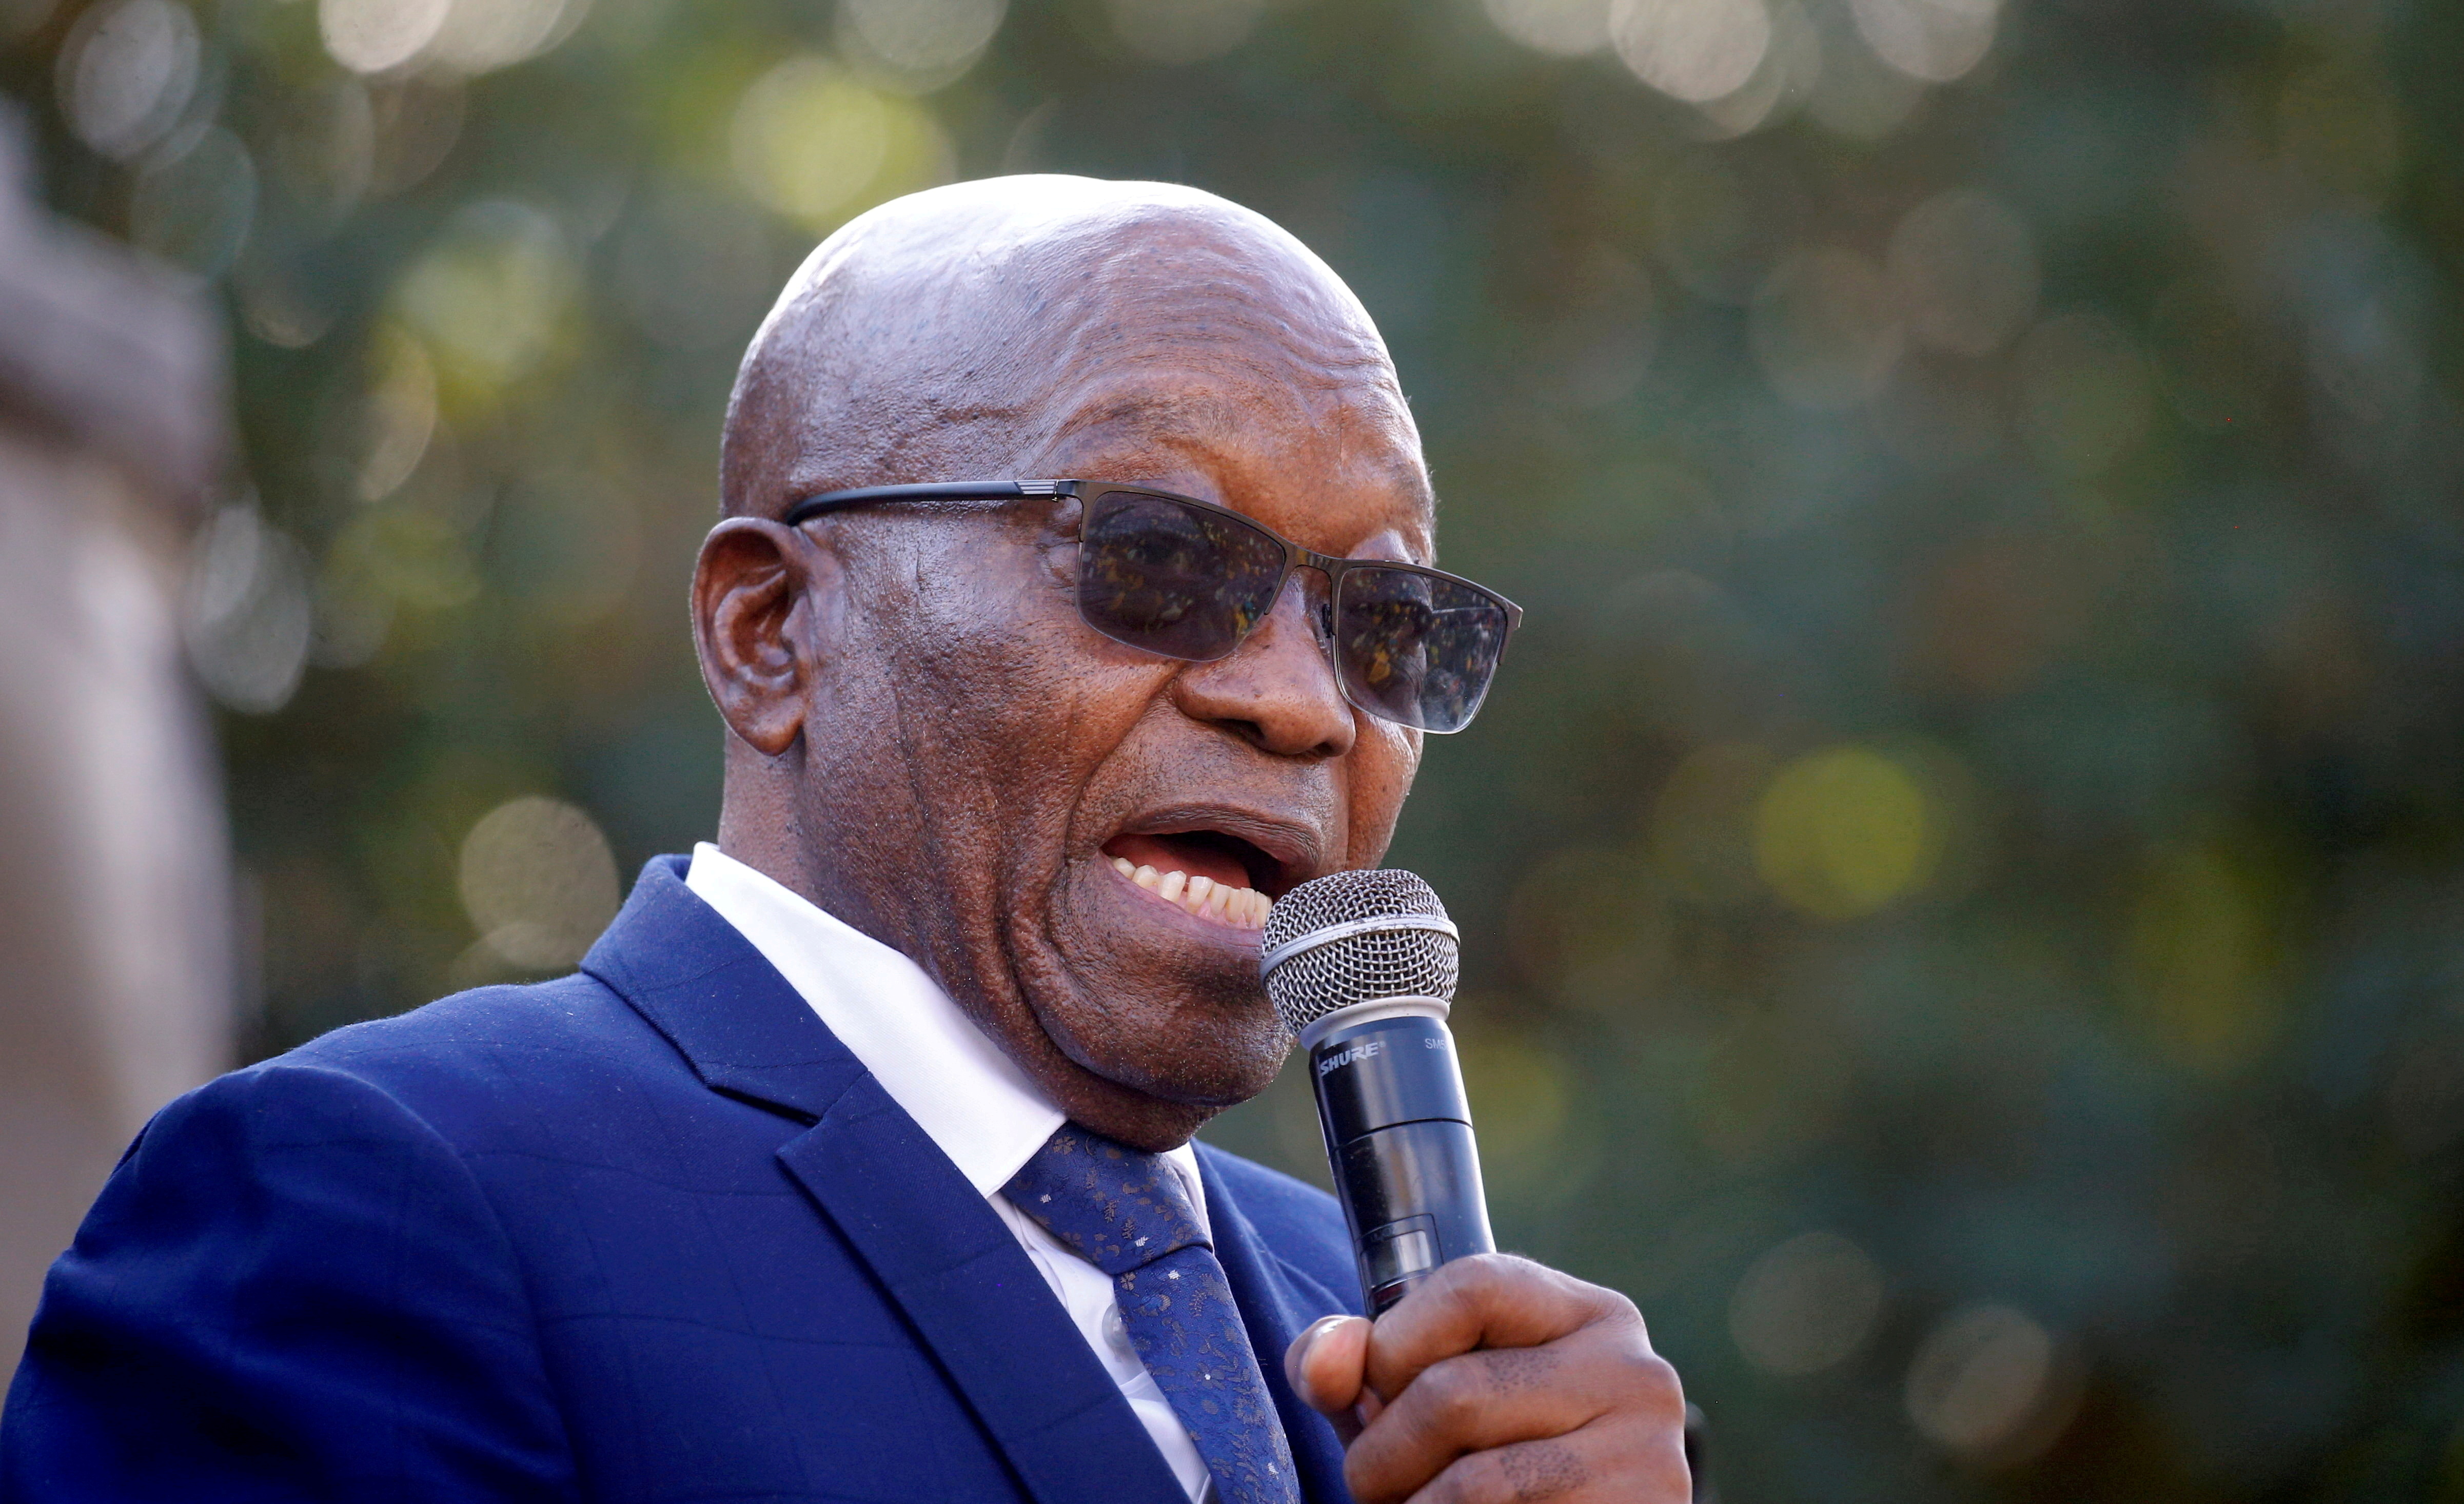 Former South African President Jacob Zuma speaks to supporters after appearing at the High Court in Pietermaritzburg